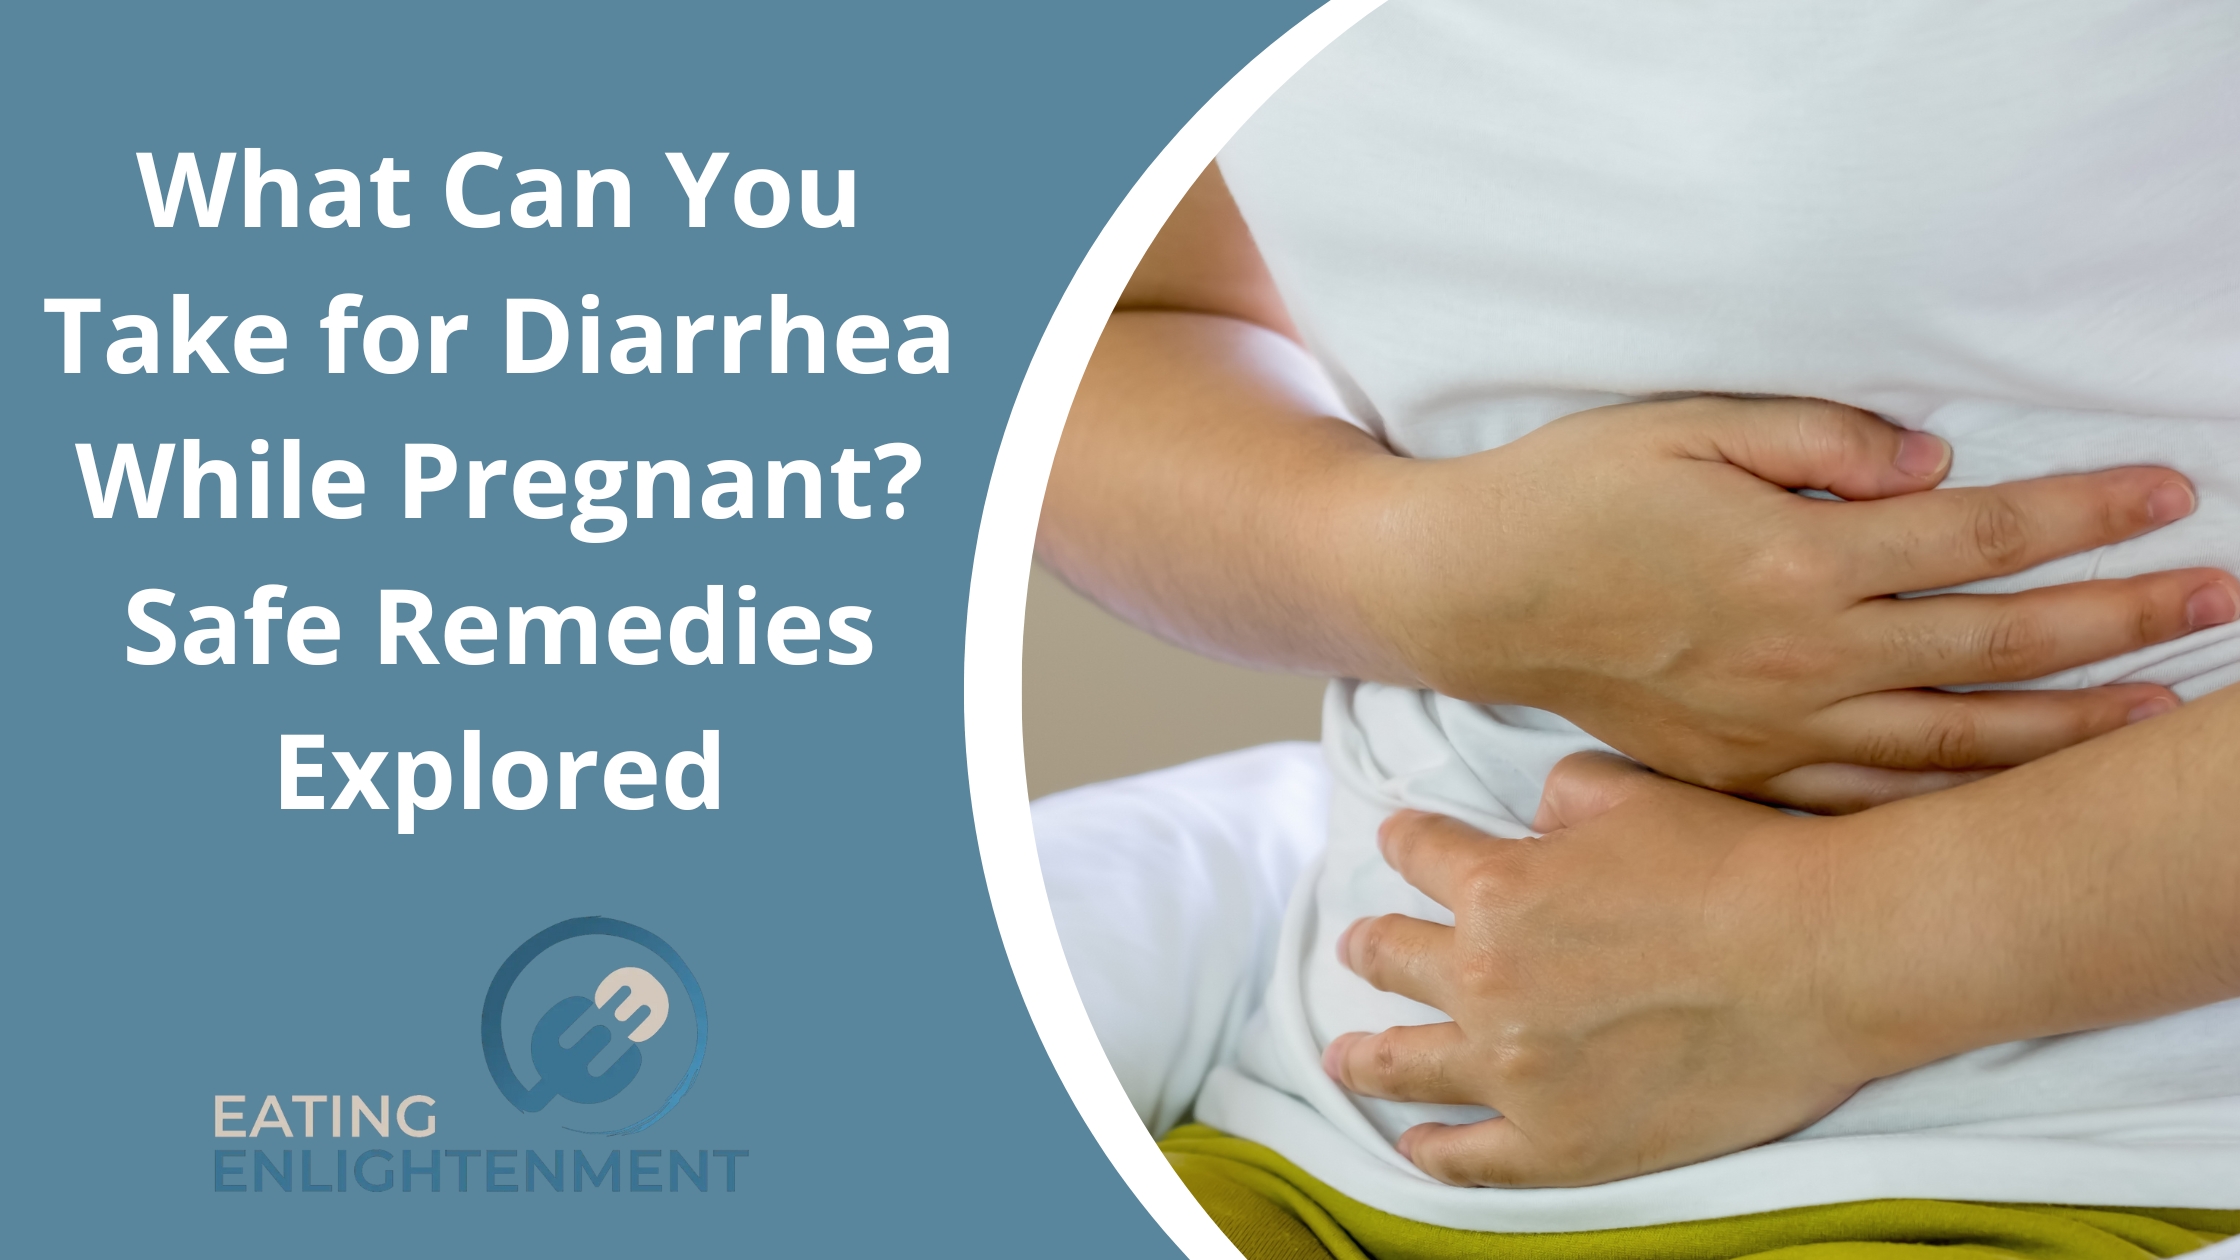 What Can You Take for Diarrhea While Pregnant? Safe Remedies Explored